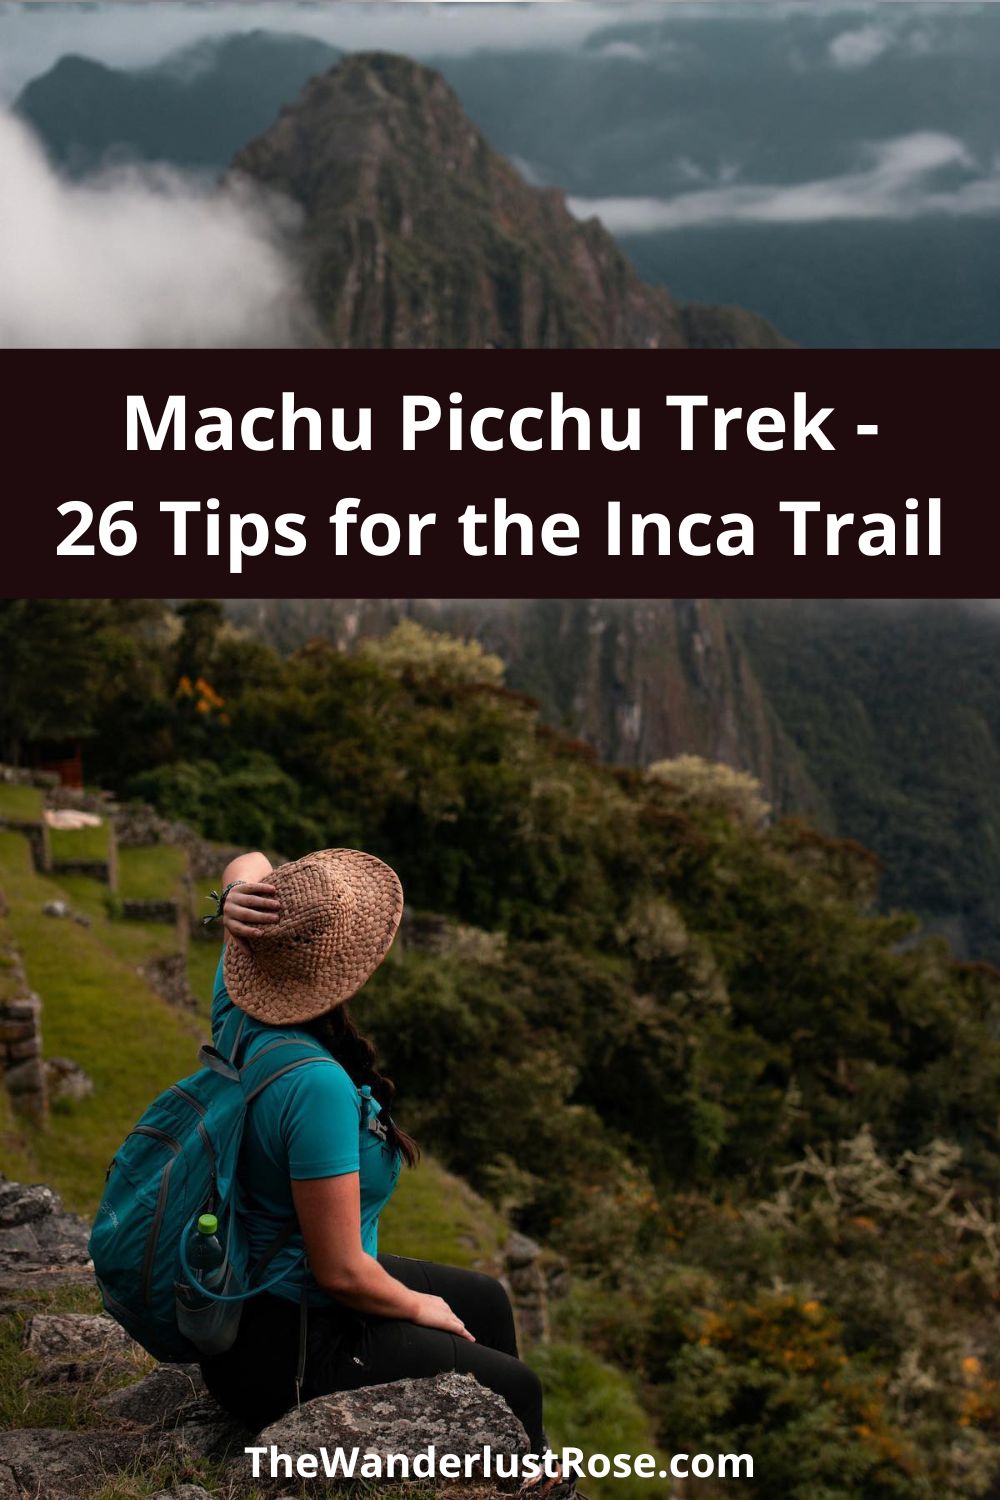 26 Tips for Trekking the Inca Trail To Machu Picchu - The Wanderlust Rose